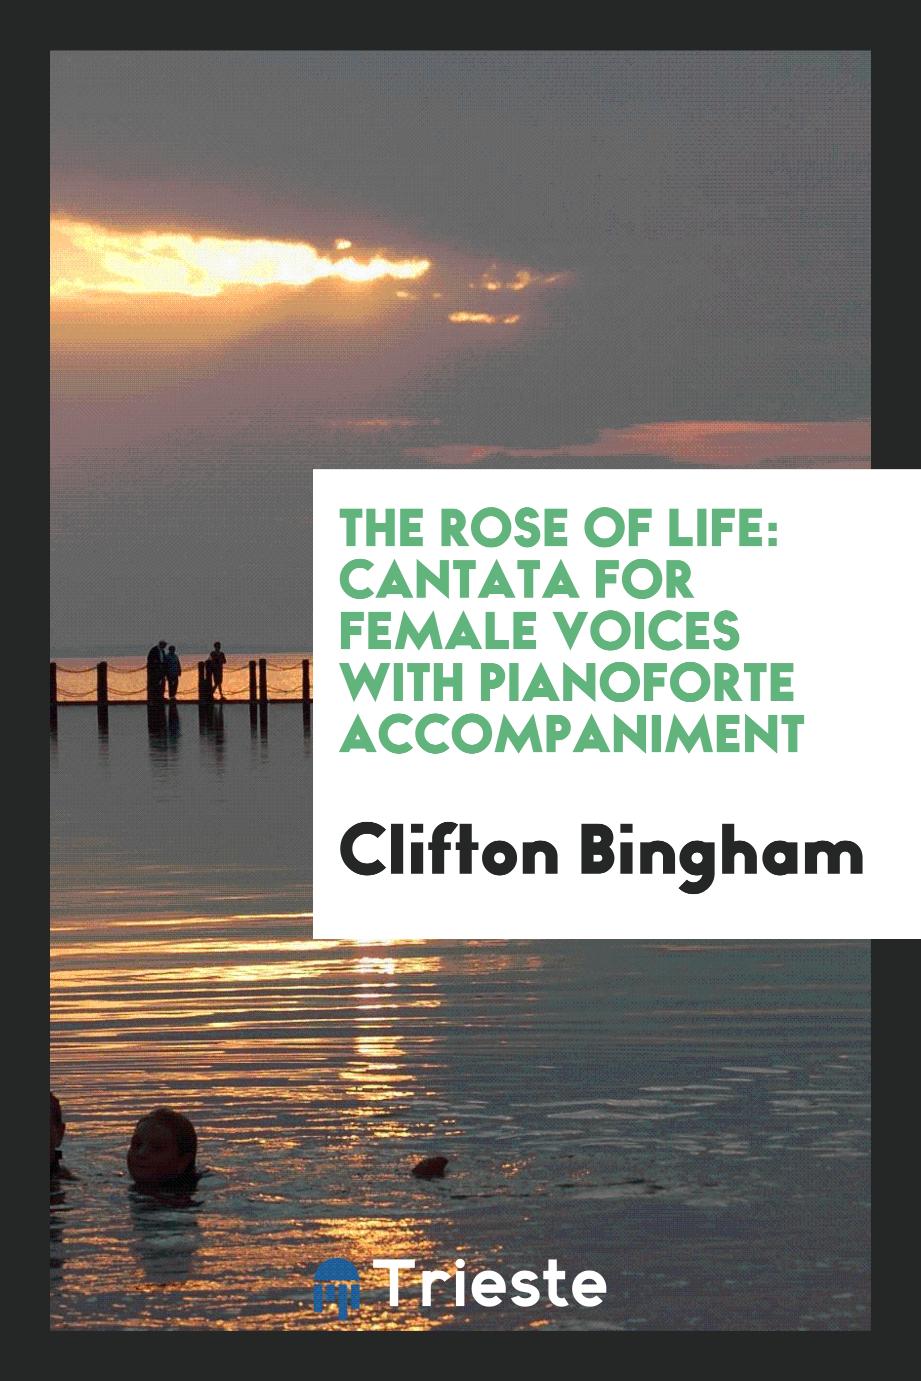 The Rose of Life: Cantata for Female Voices with Pianoforte Accompaniment